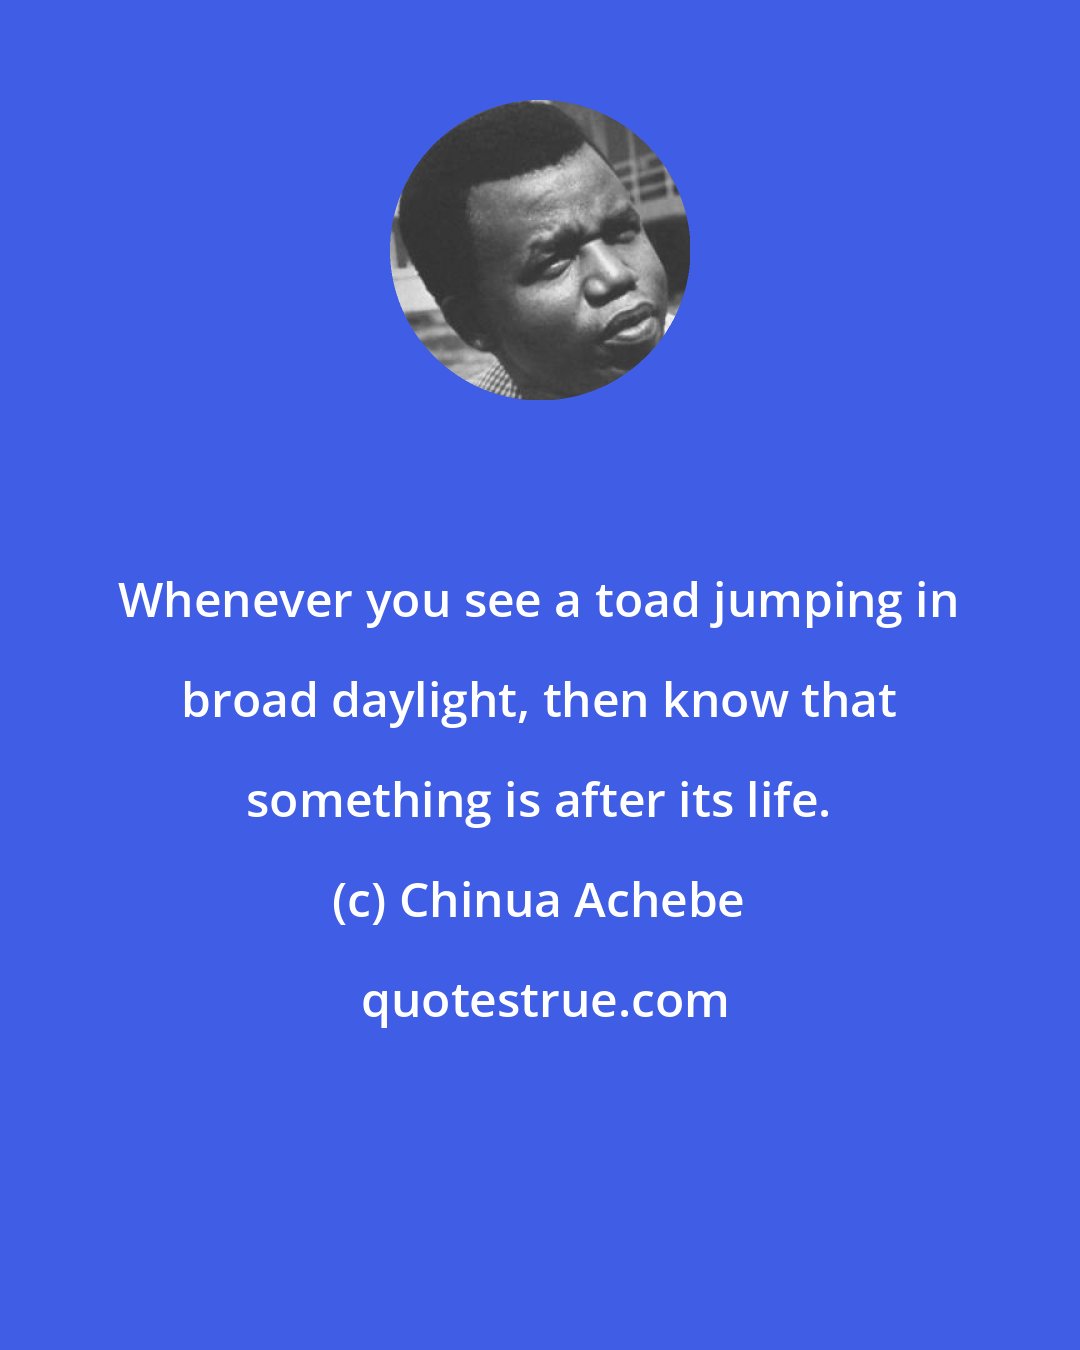 Chinua Achebe: Whenever you see a toad jumping in broad daylight, then know that something is after its life.